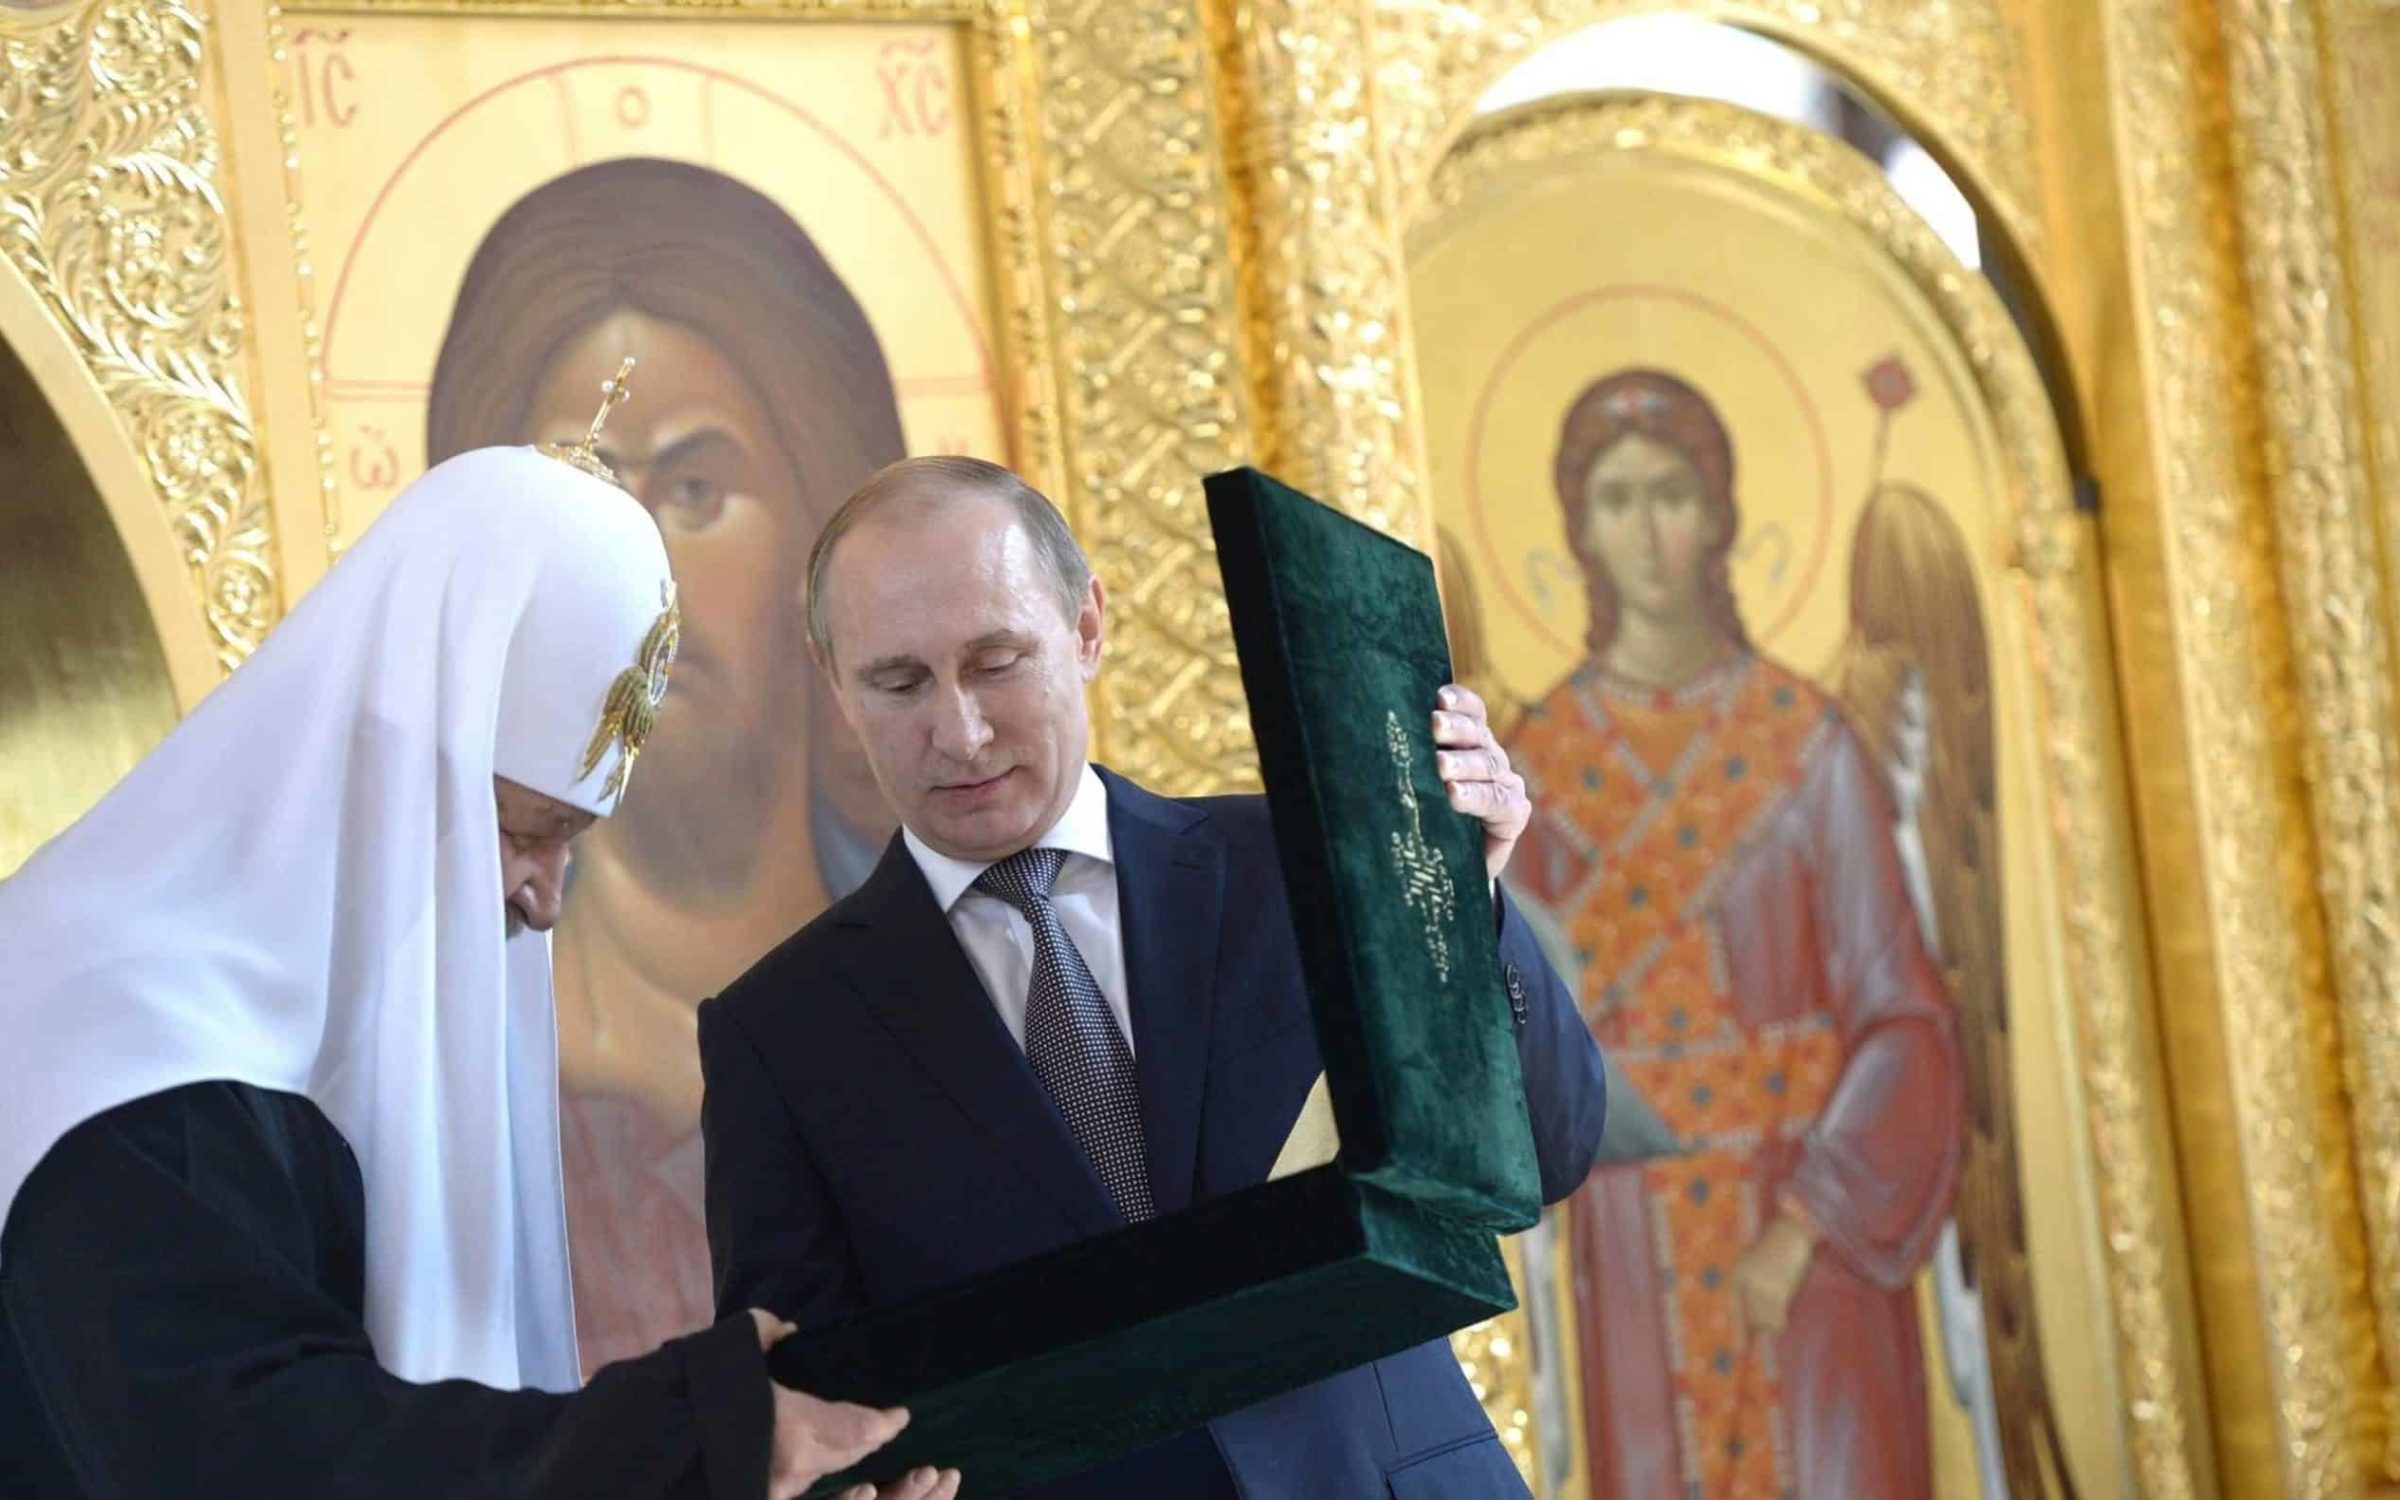 Russian President Vladimir Putin presents Patriarch of Moscow and All Russia Kirill with a Mother of God icon during a visit to the newly restored Church of St Vladimir at the Moscow Diocesan House to mark 1000 years since the death of St. Vladimir July 27, 2015 in Moscow, Russia.